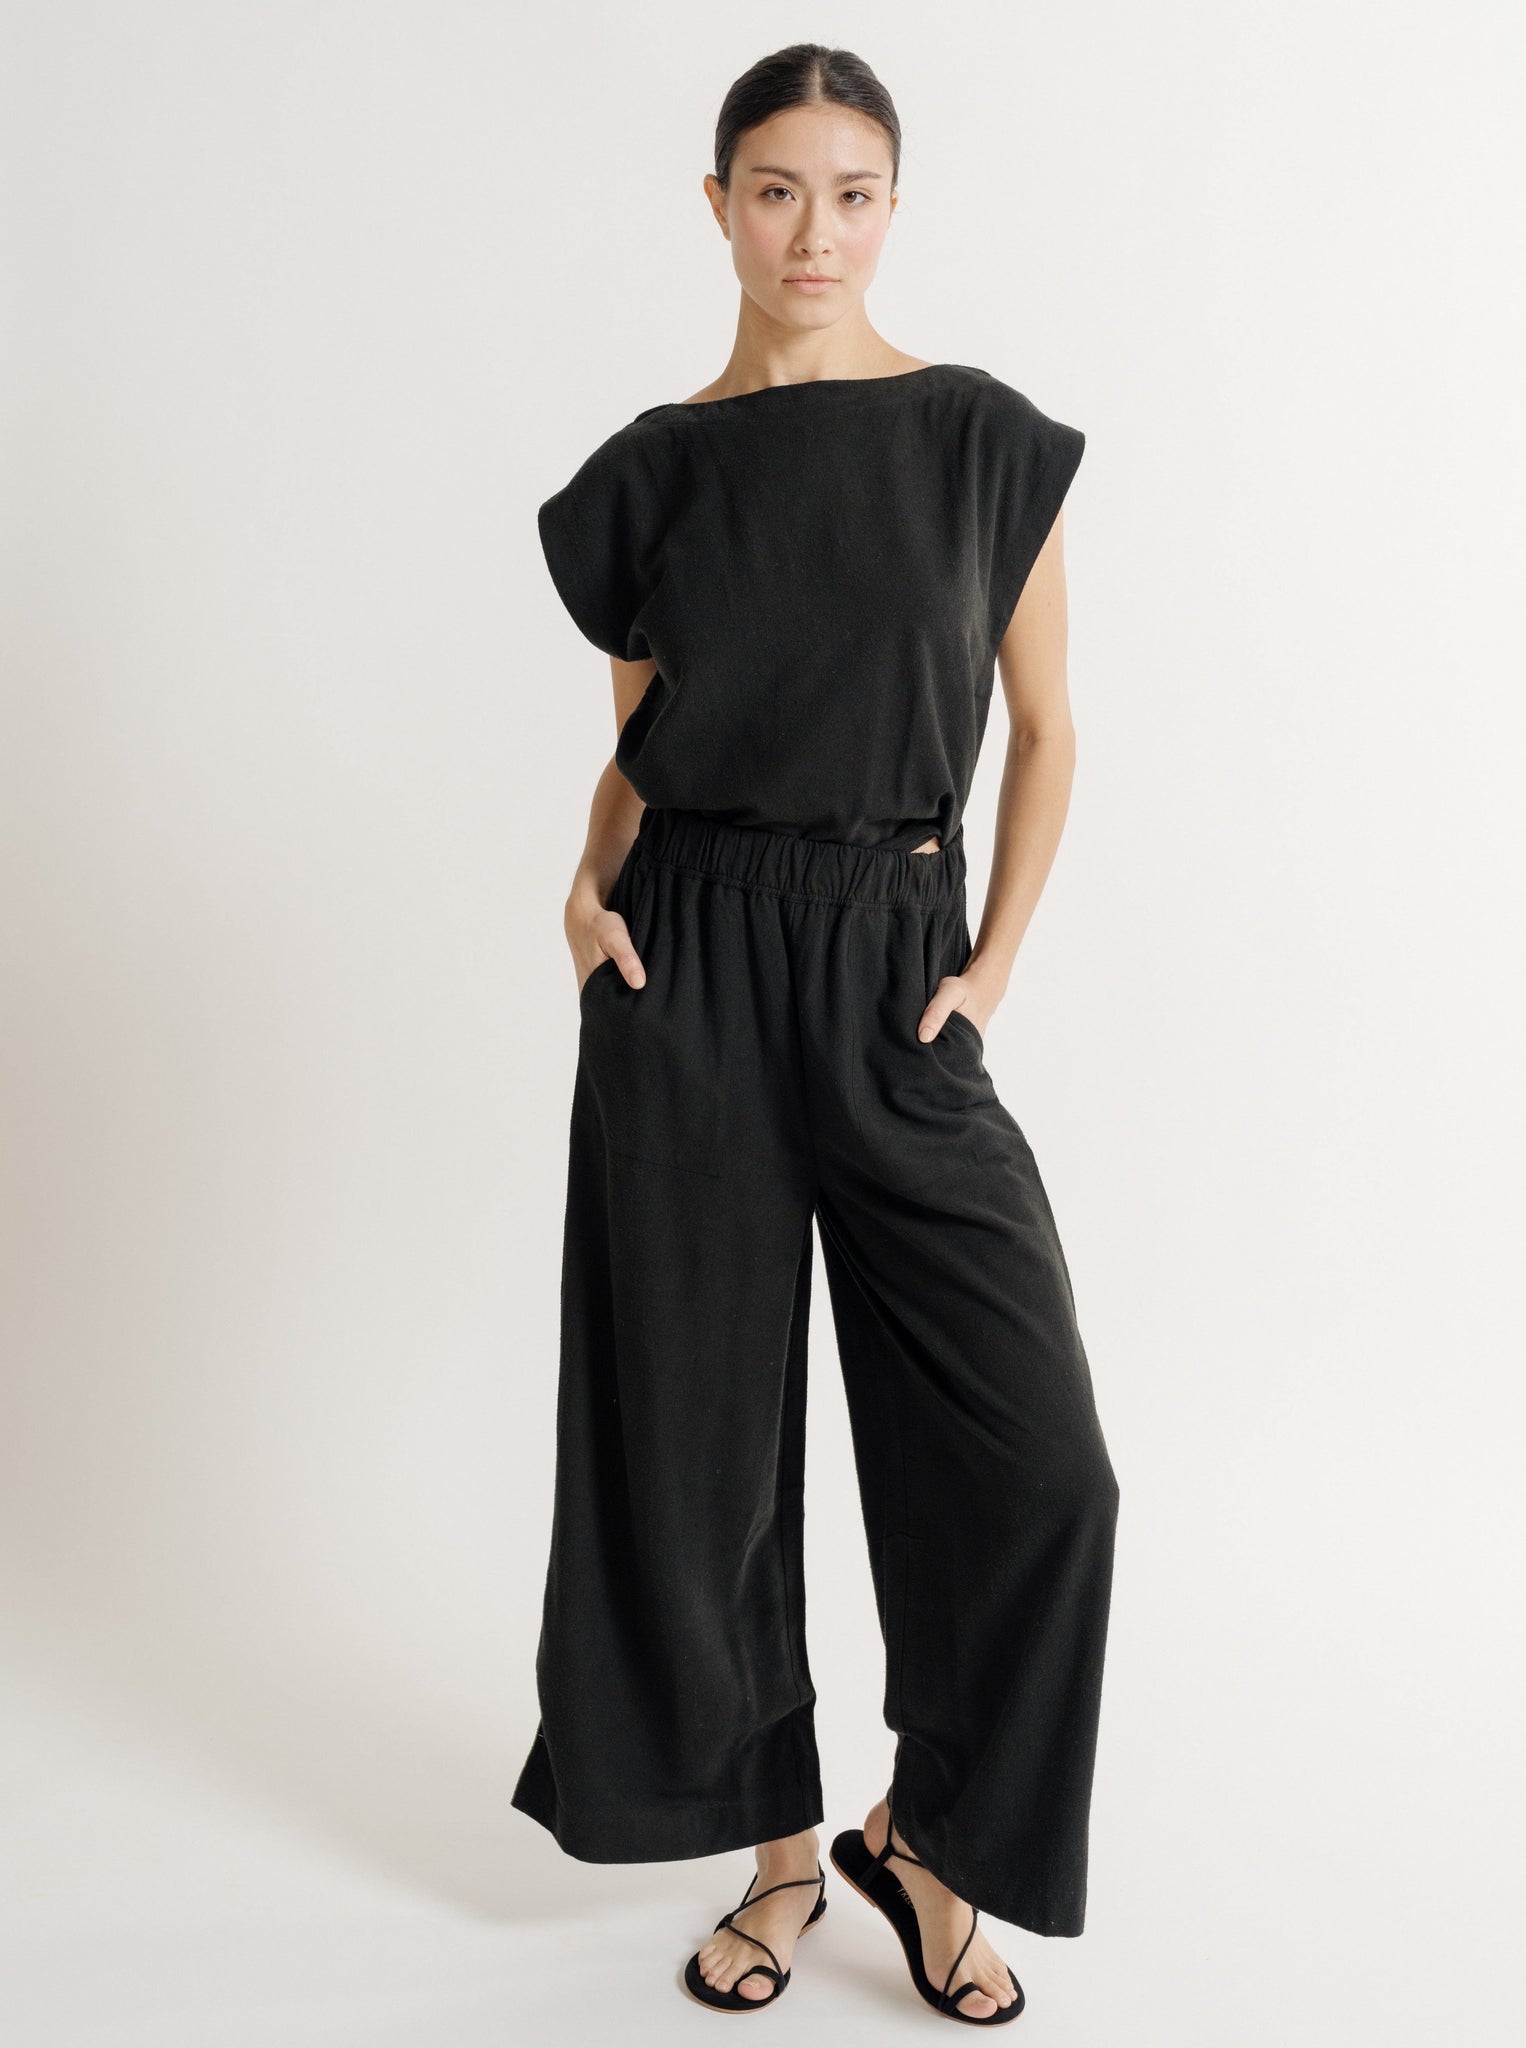 A sustainable woman wearing the Everyday Pant - Black Silk Noil - Pre-order and sandals.